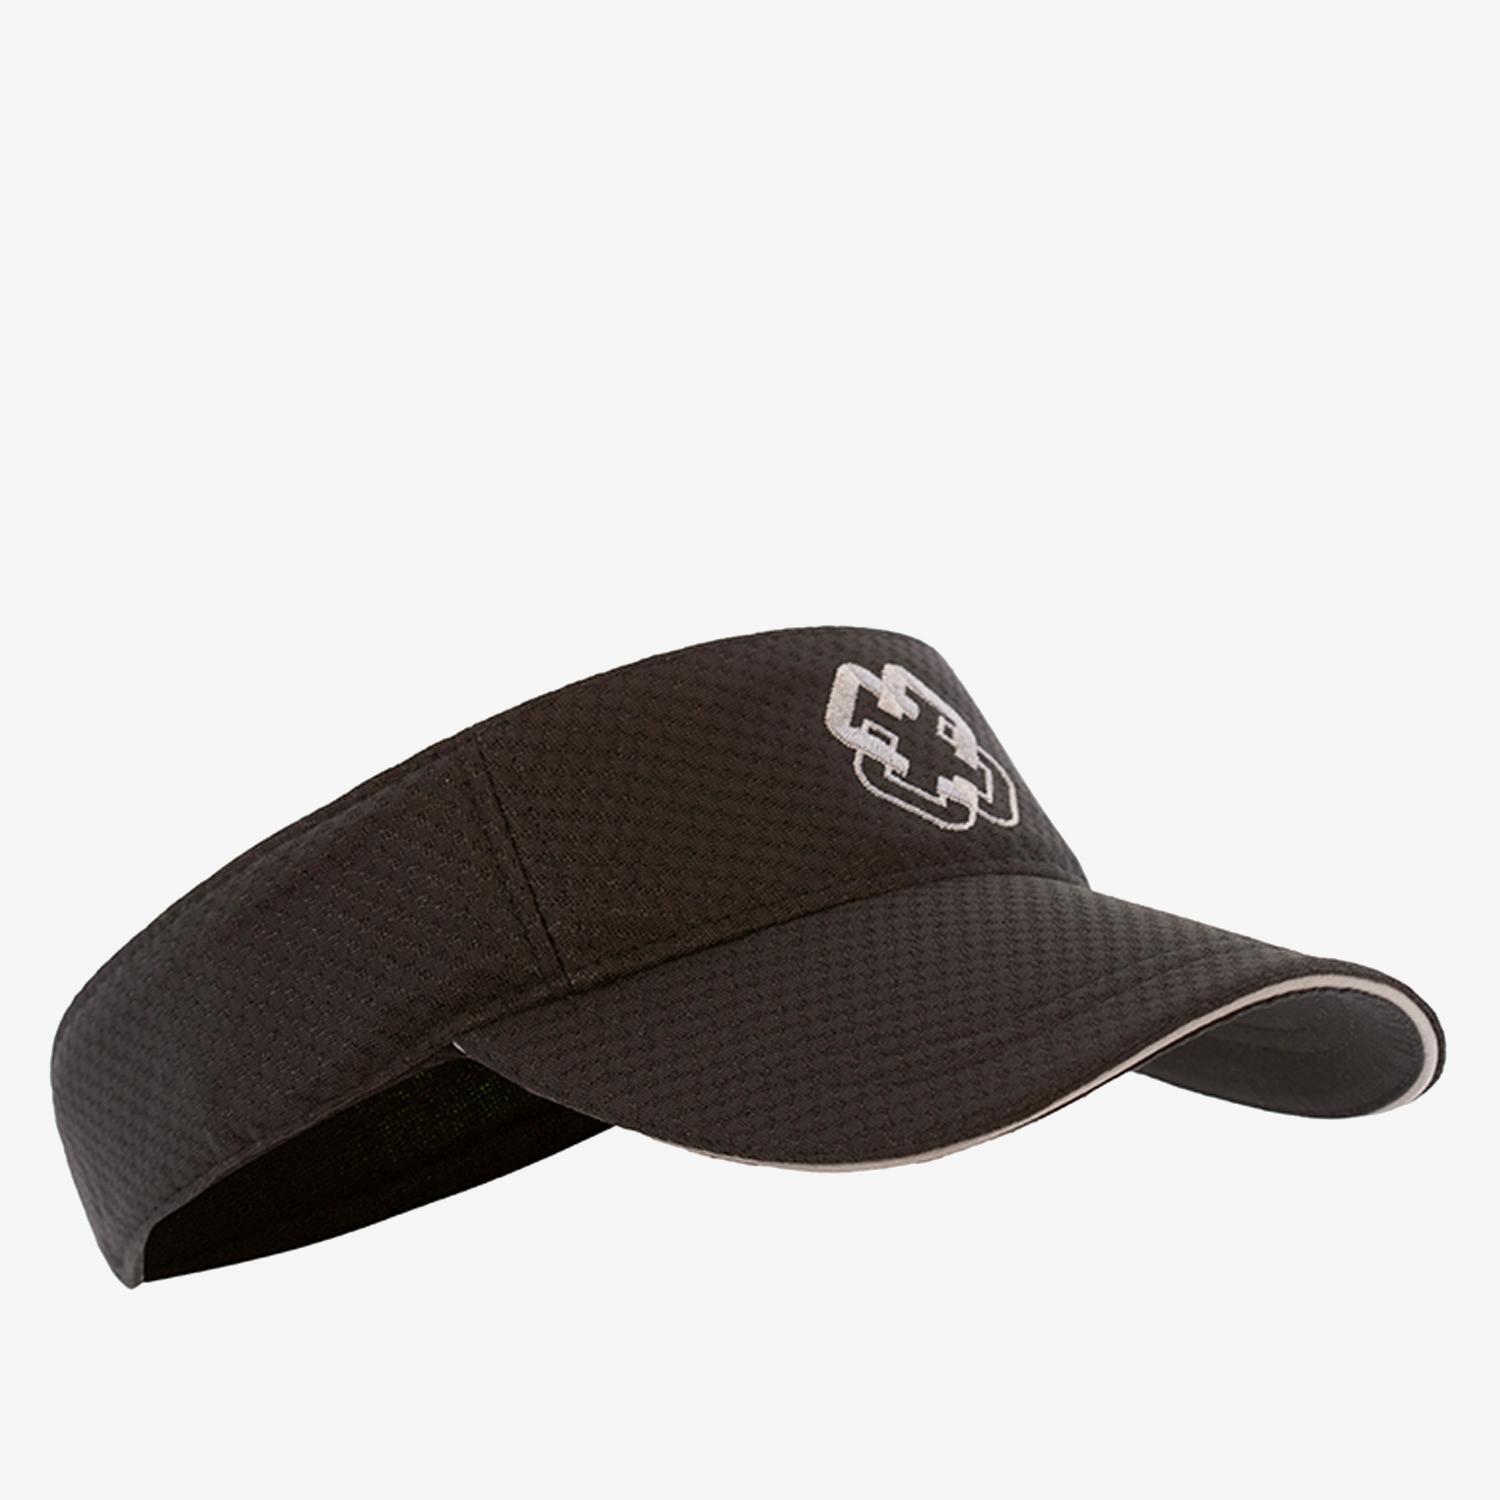 Casquette Arch Max - Noir - Visière Running sports taille UNICA